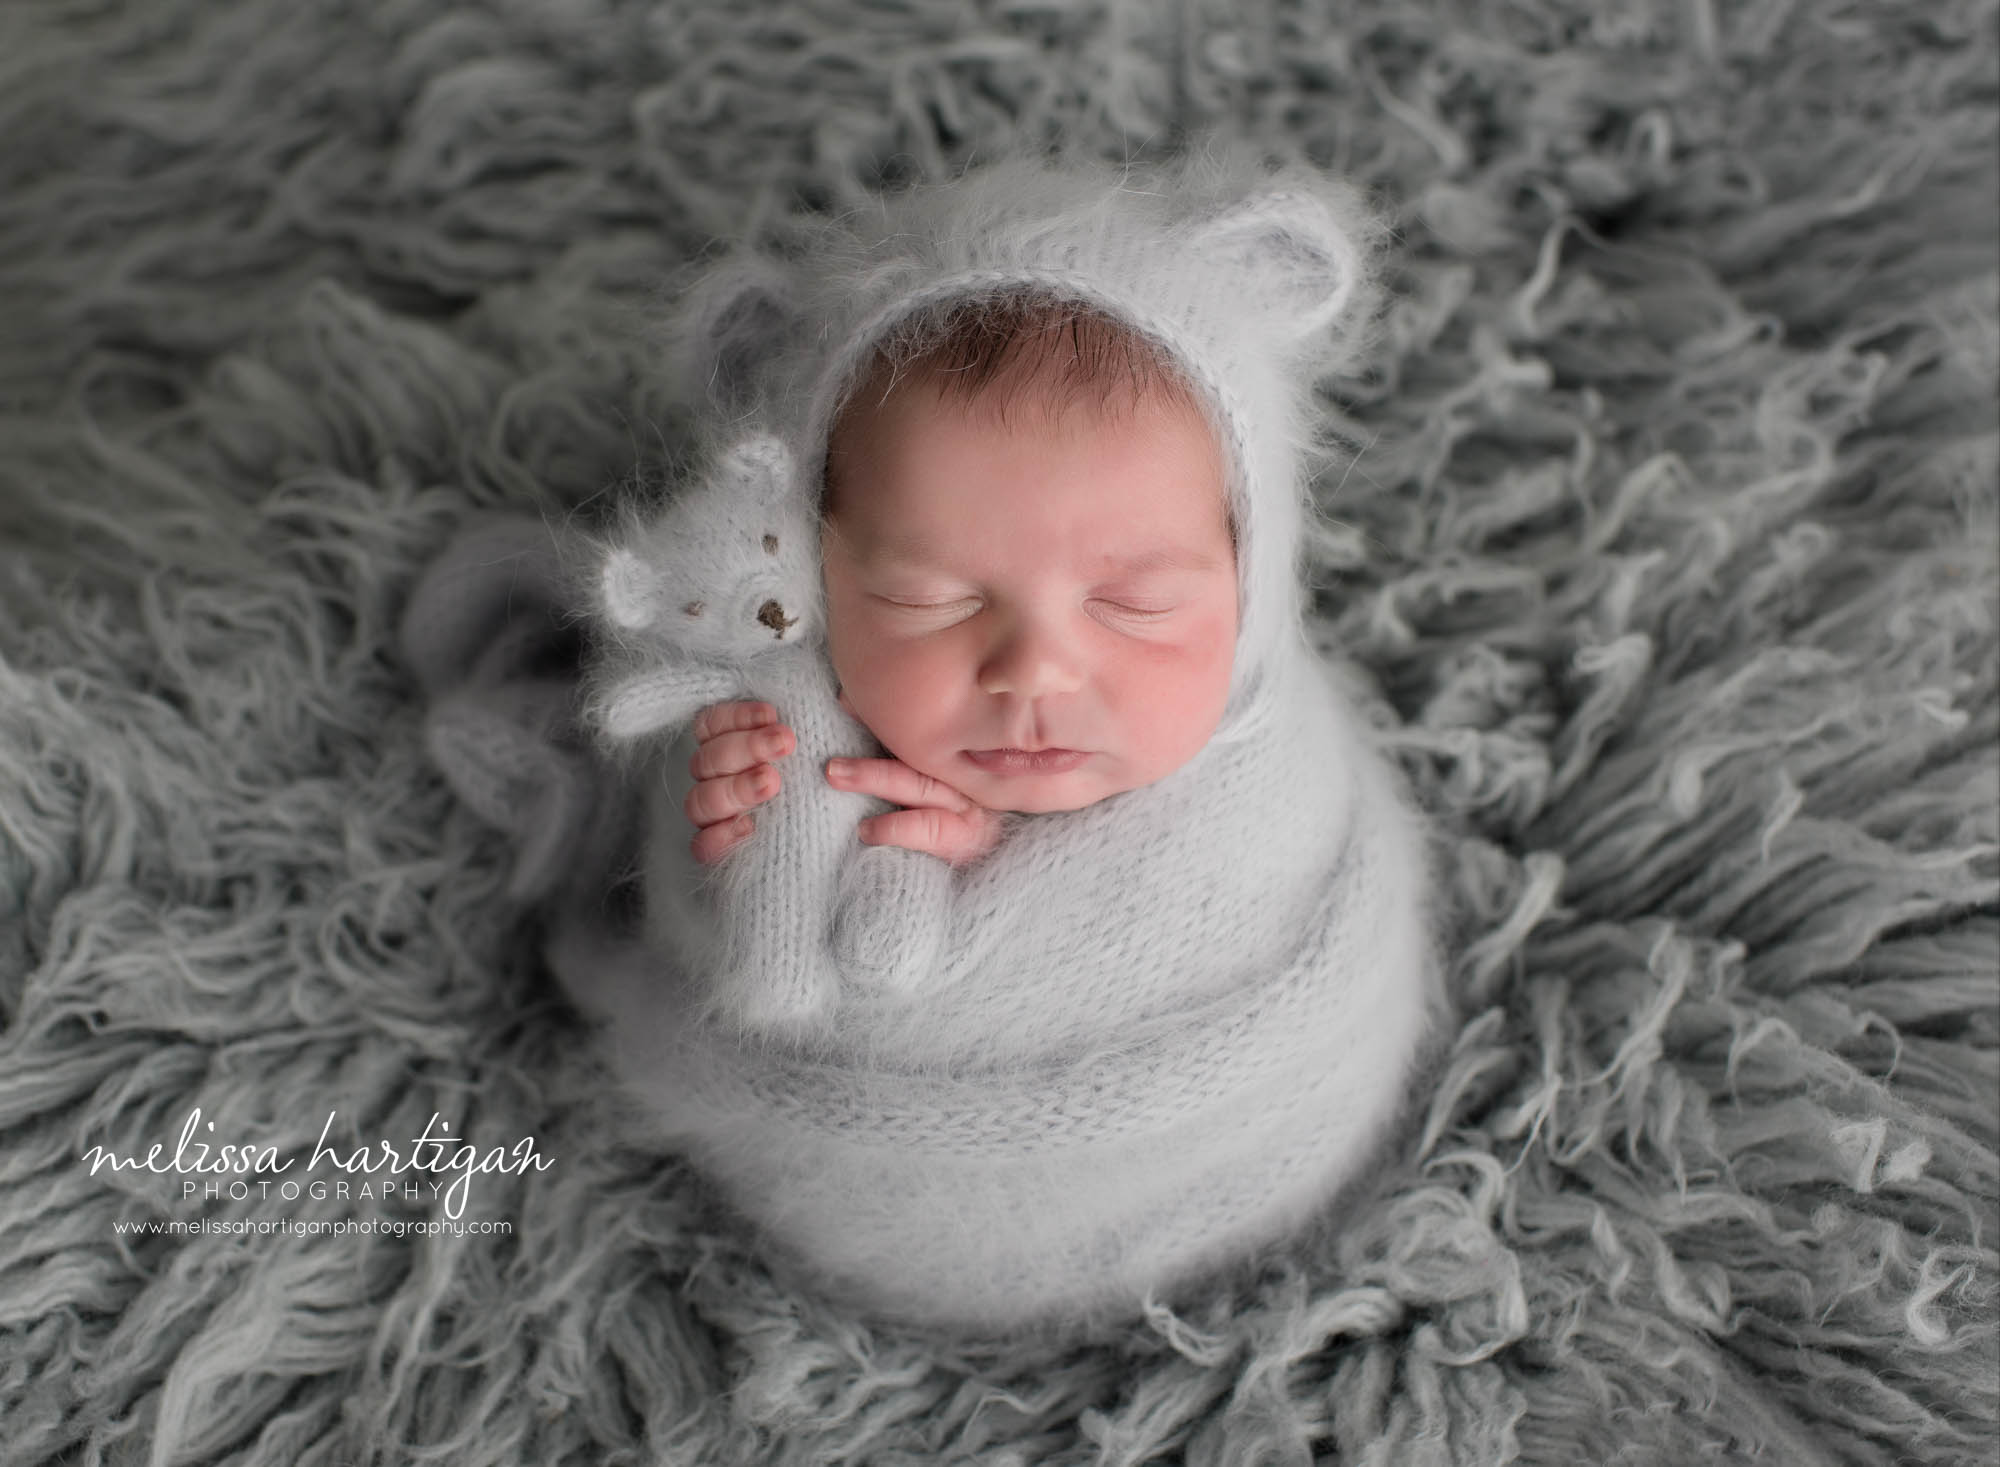 Newborn boy wrapped in gray knitted wrap with matching bear bonnet and teddy